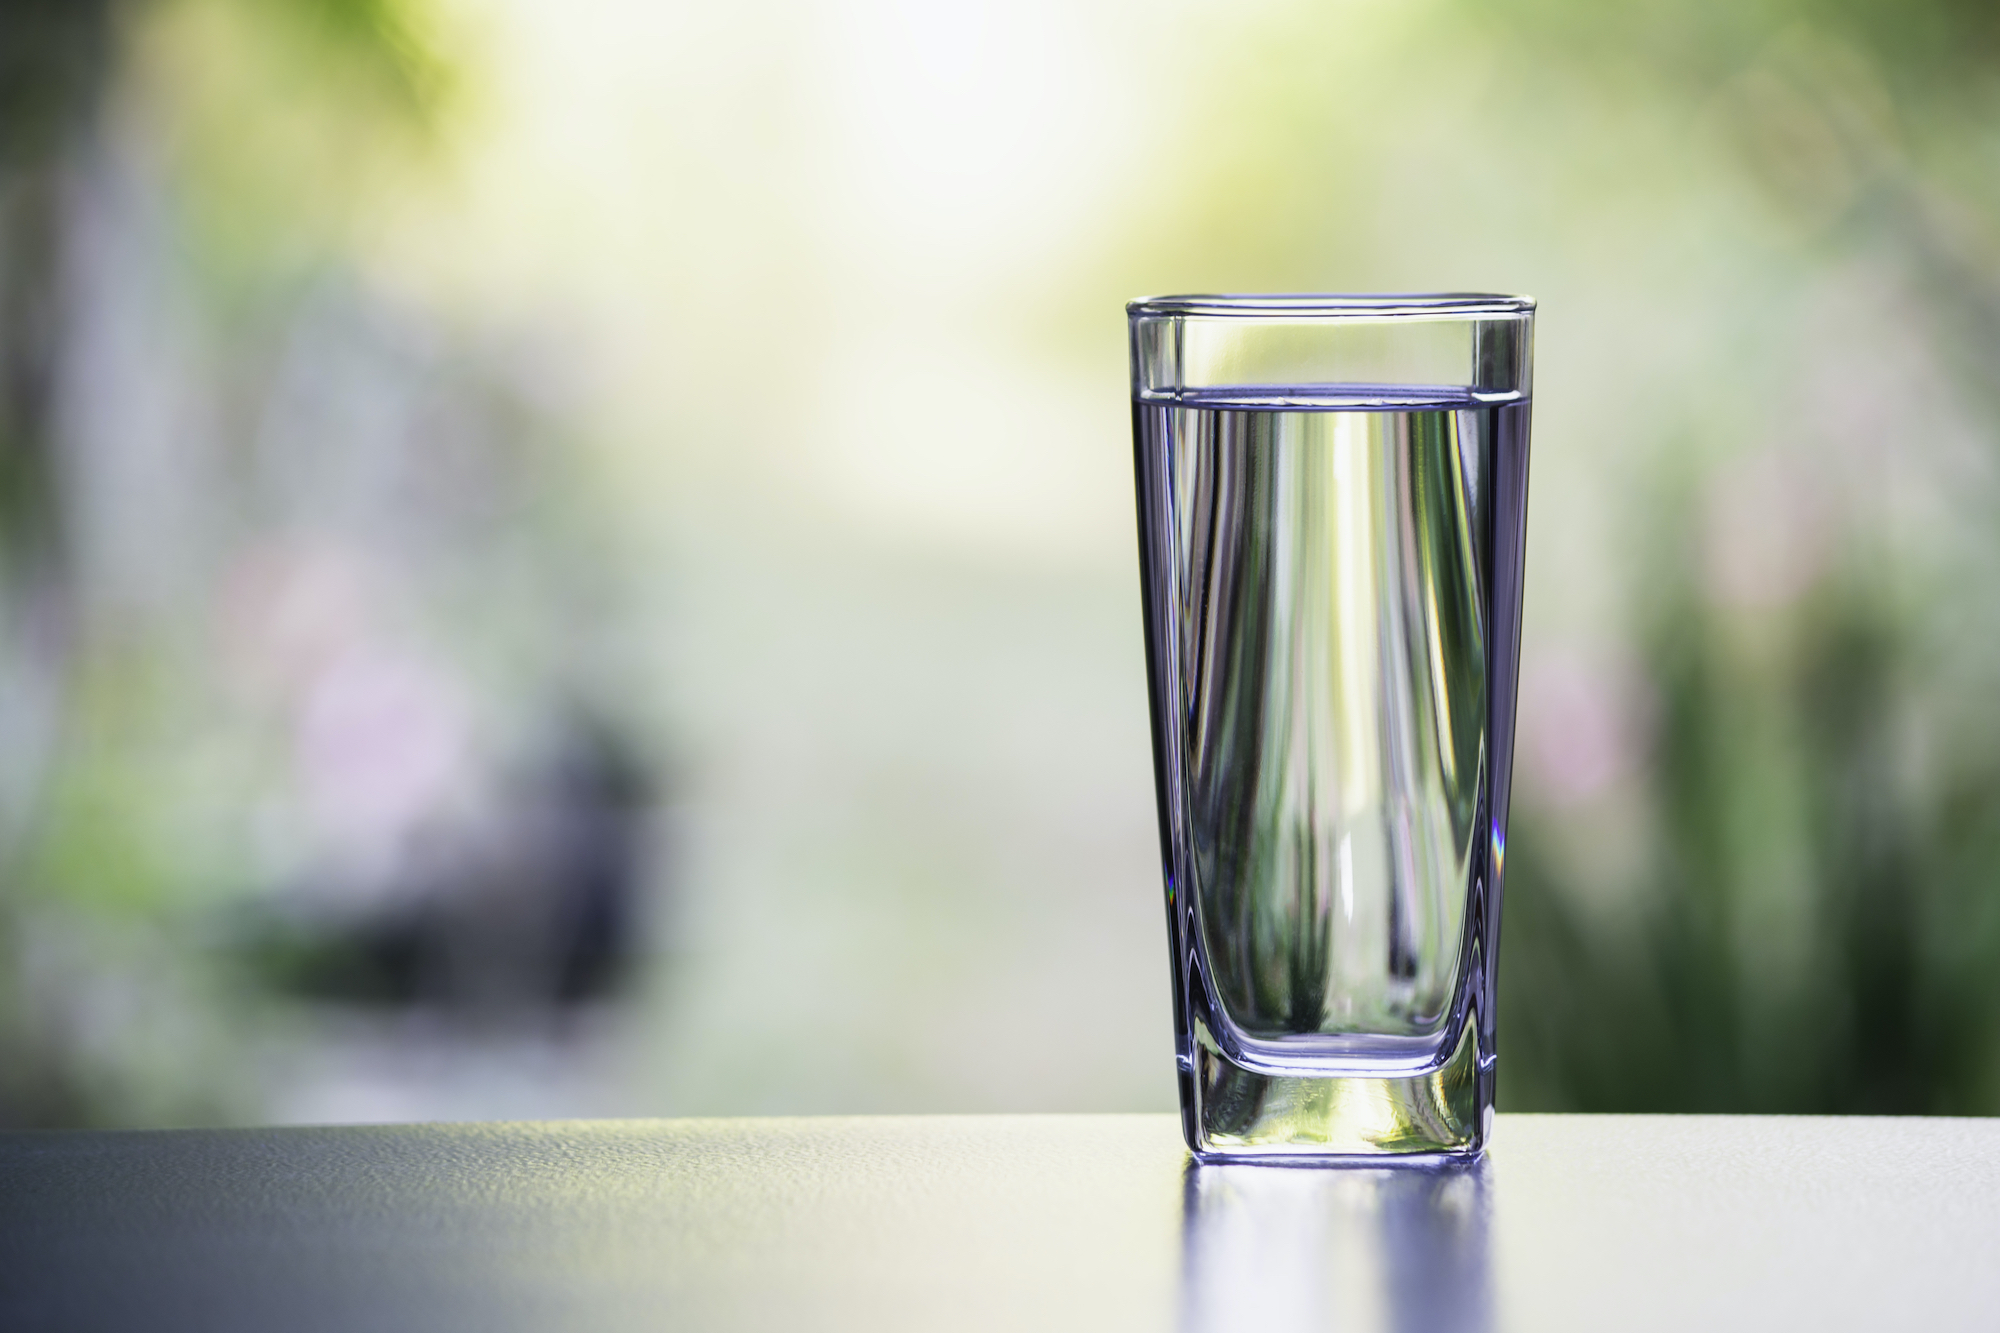 A tall clear glass of water filled almost to the top on a dark-colored countertop. Nature is obvious but blurred in the background.